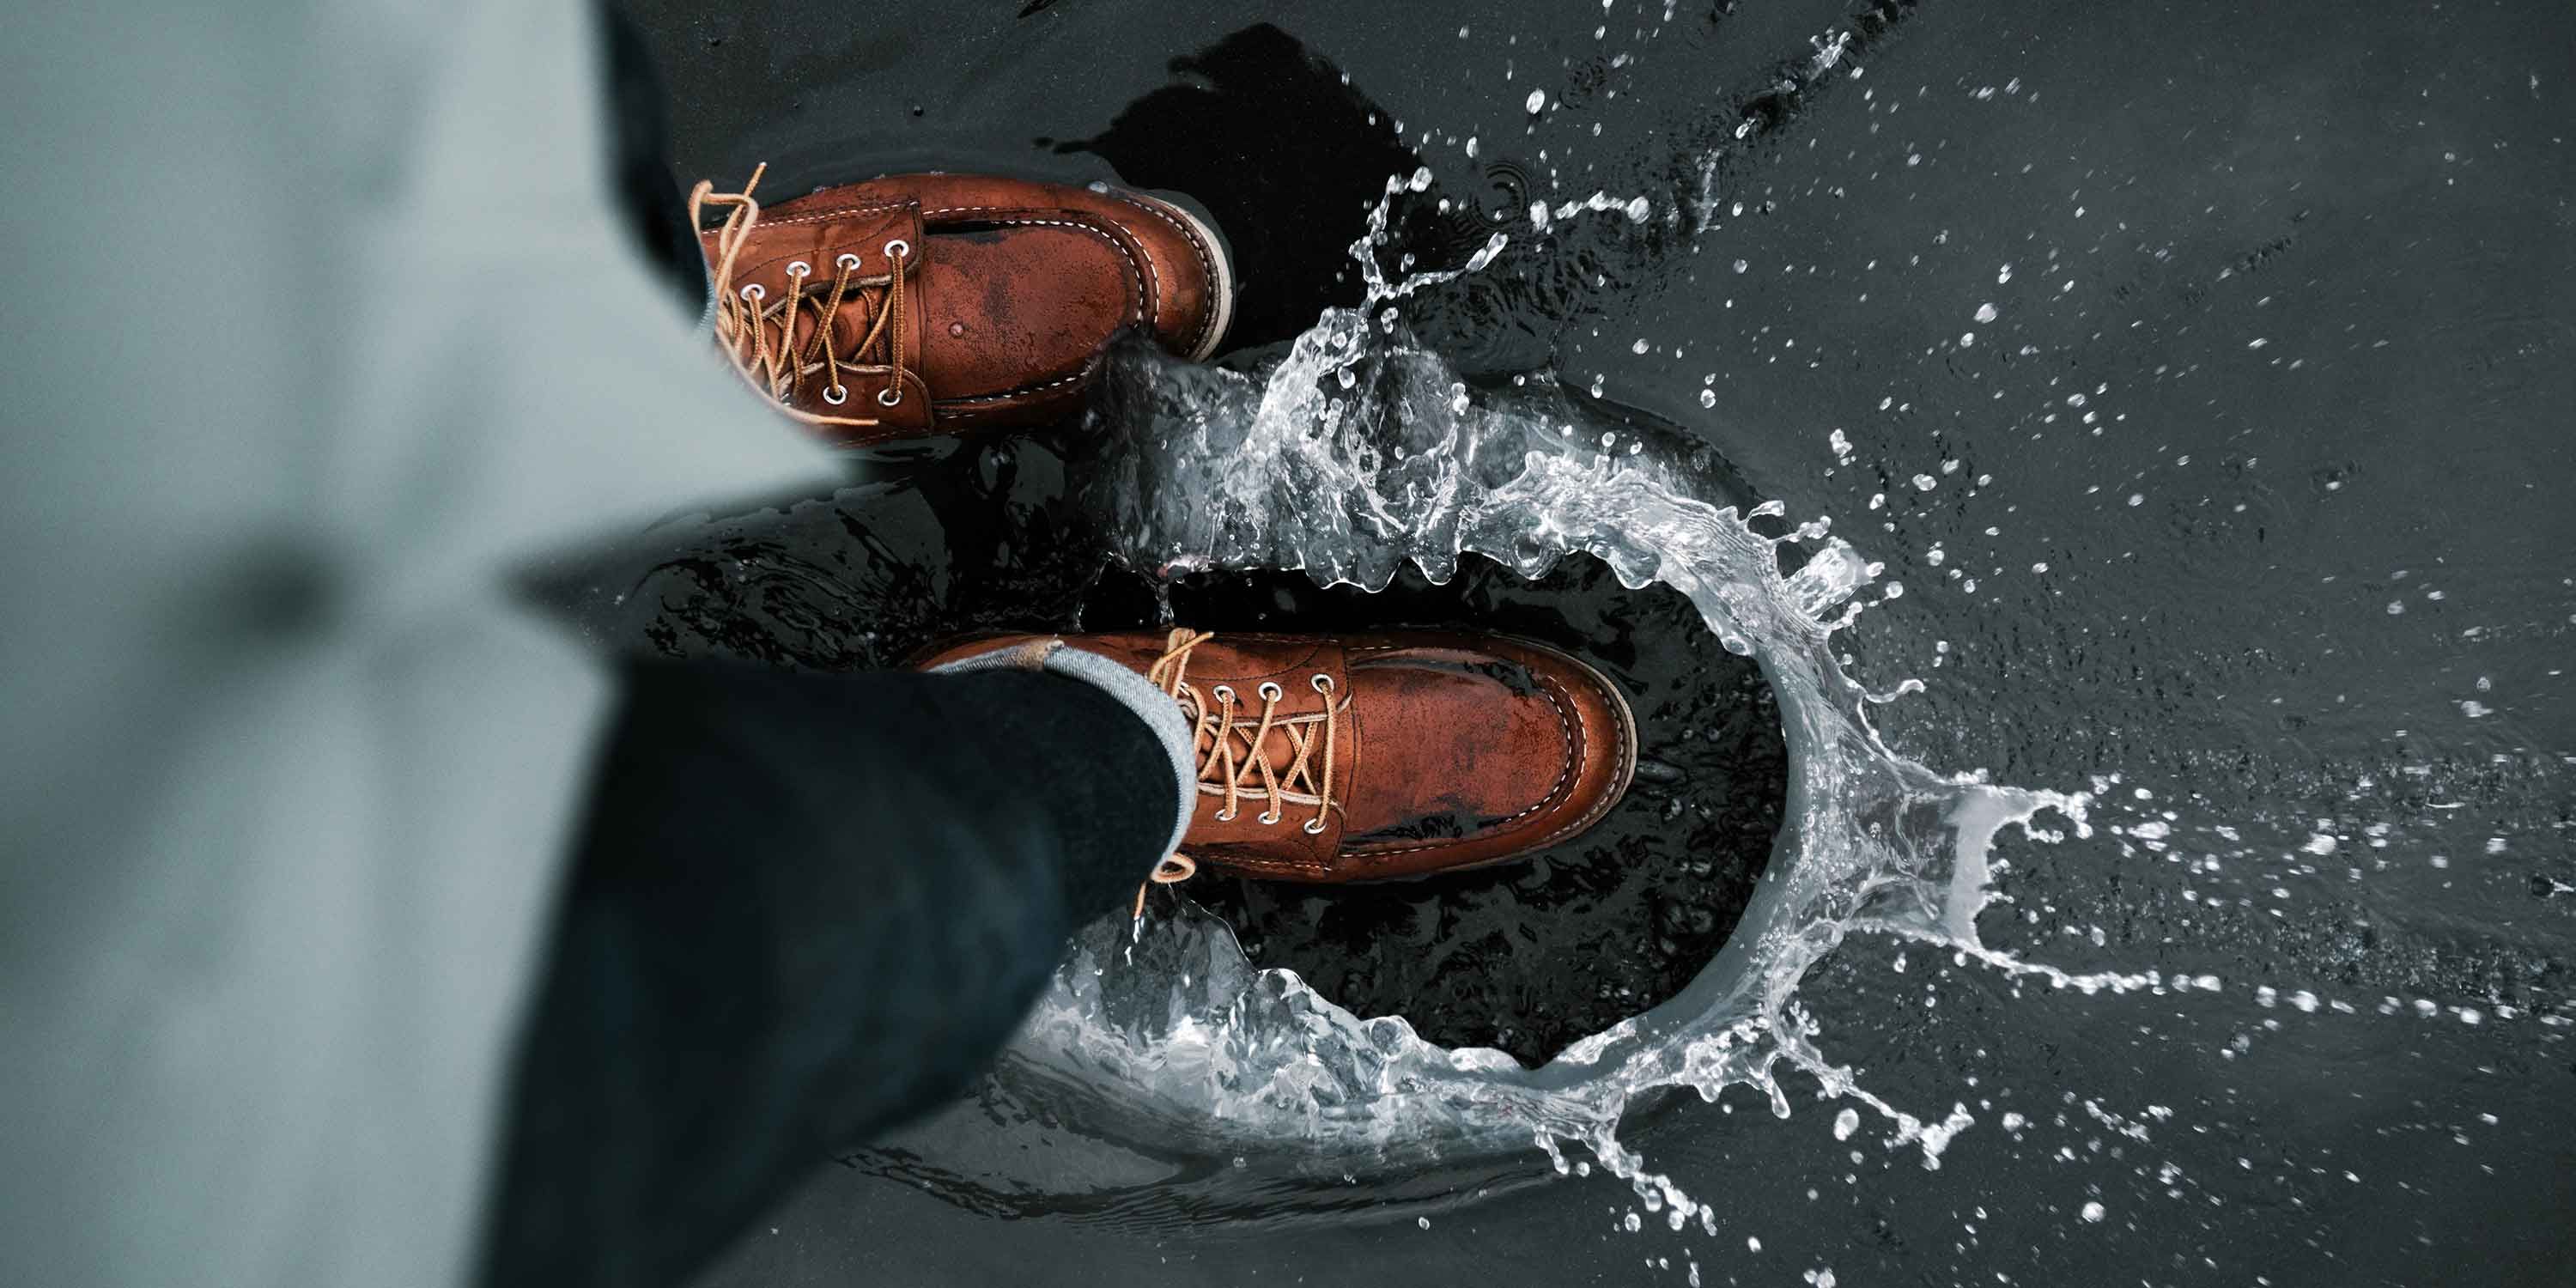 How a Soggy Pair of Boots Changed My Whole Perspective on Life